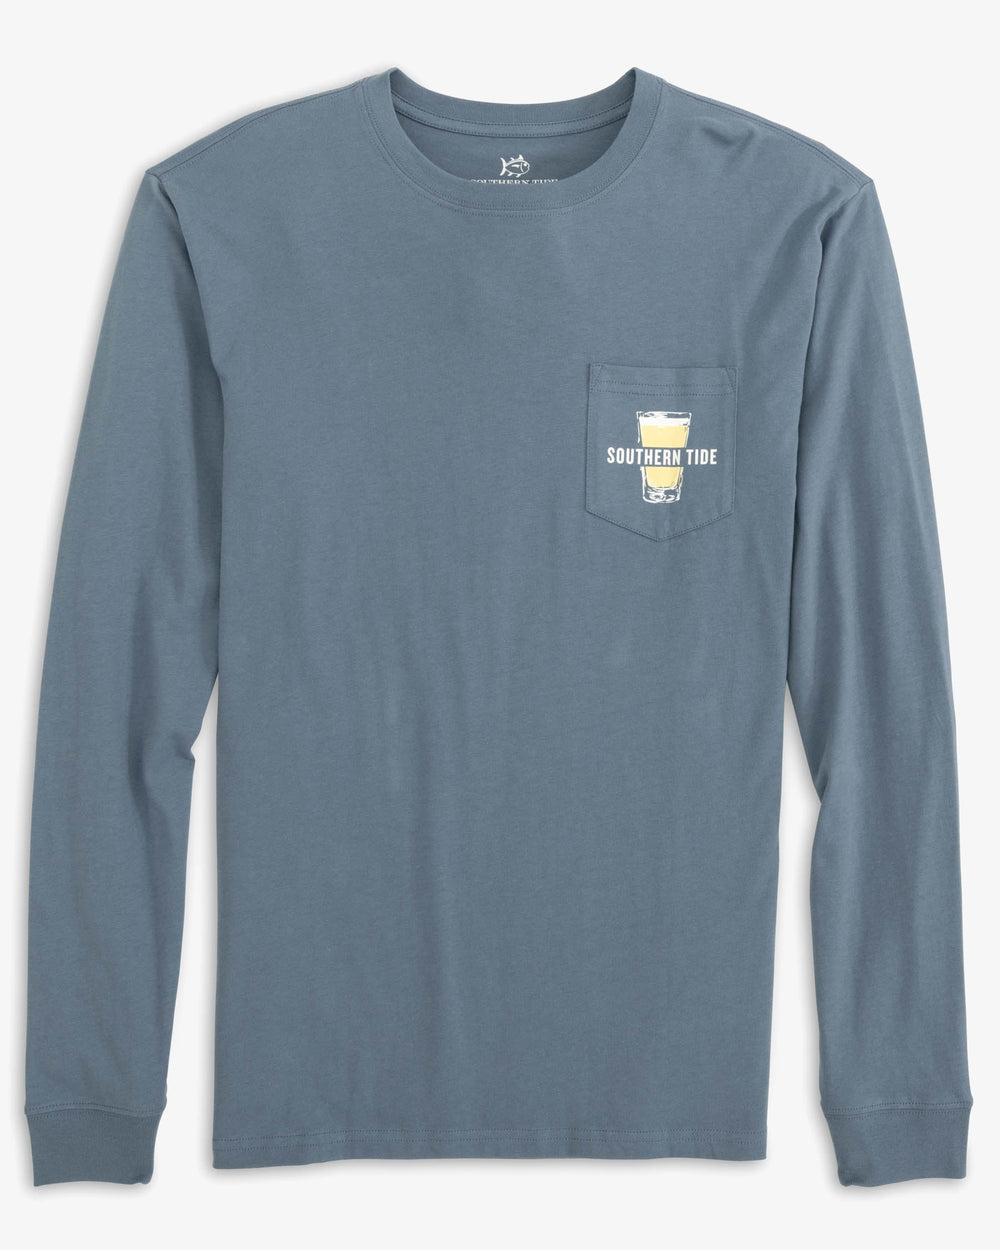 The front view of the Tide on Tap Long Sleeve T-Shirt by Southern Tide - Blue Haze